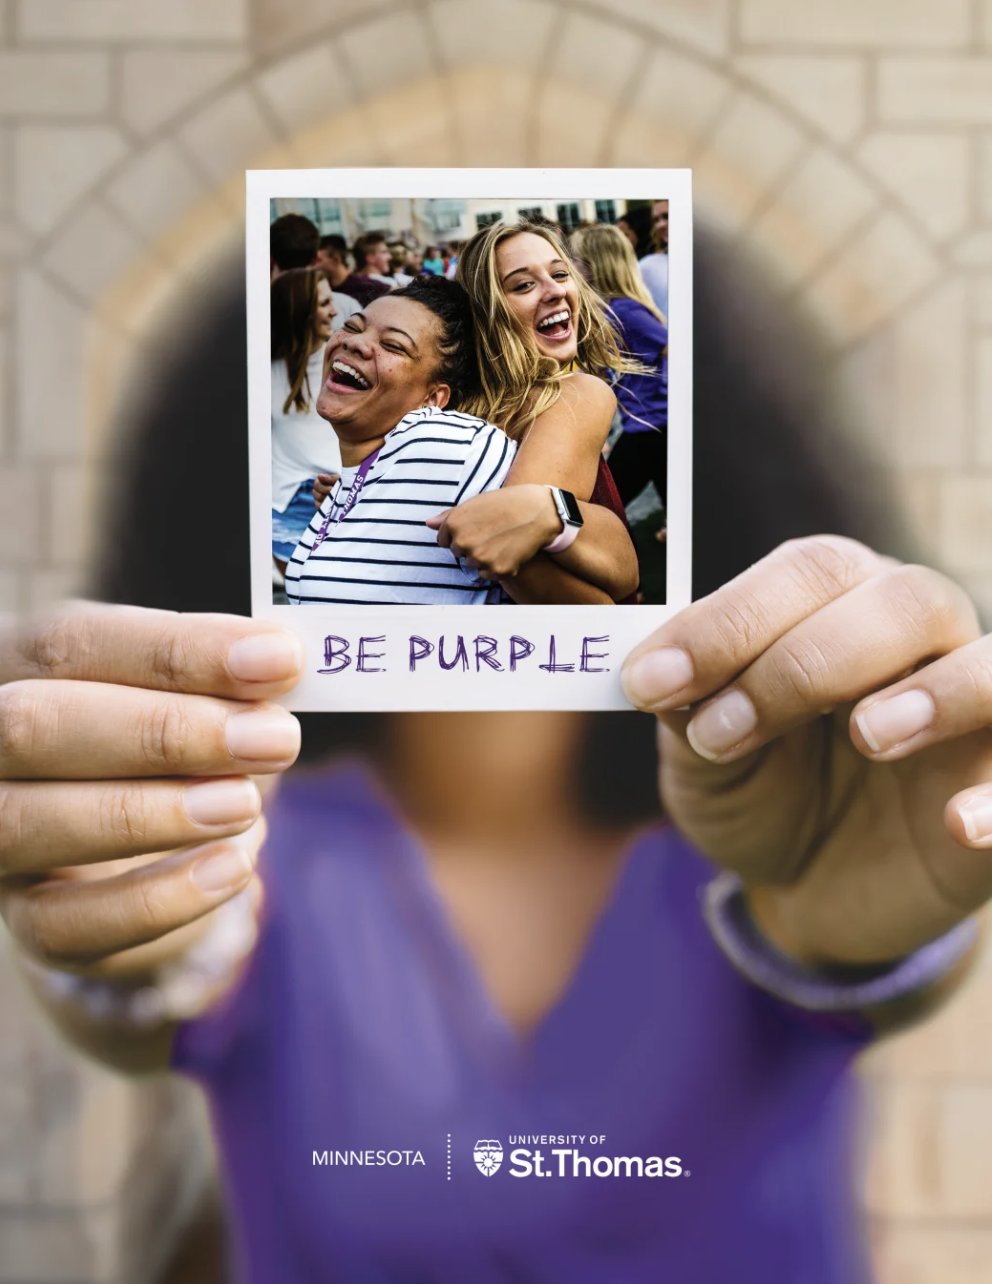 A woman in purple holding a polaroid picture of two Tommies smiling with Be Purple as the polaroid caption